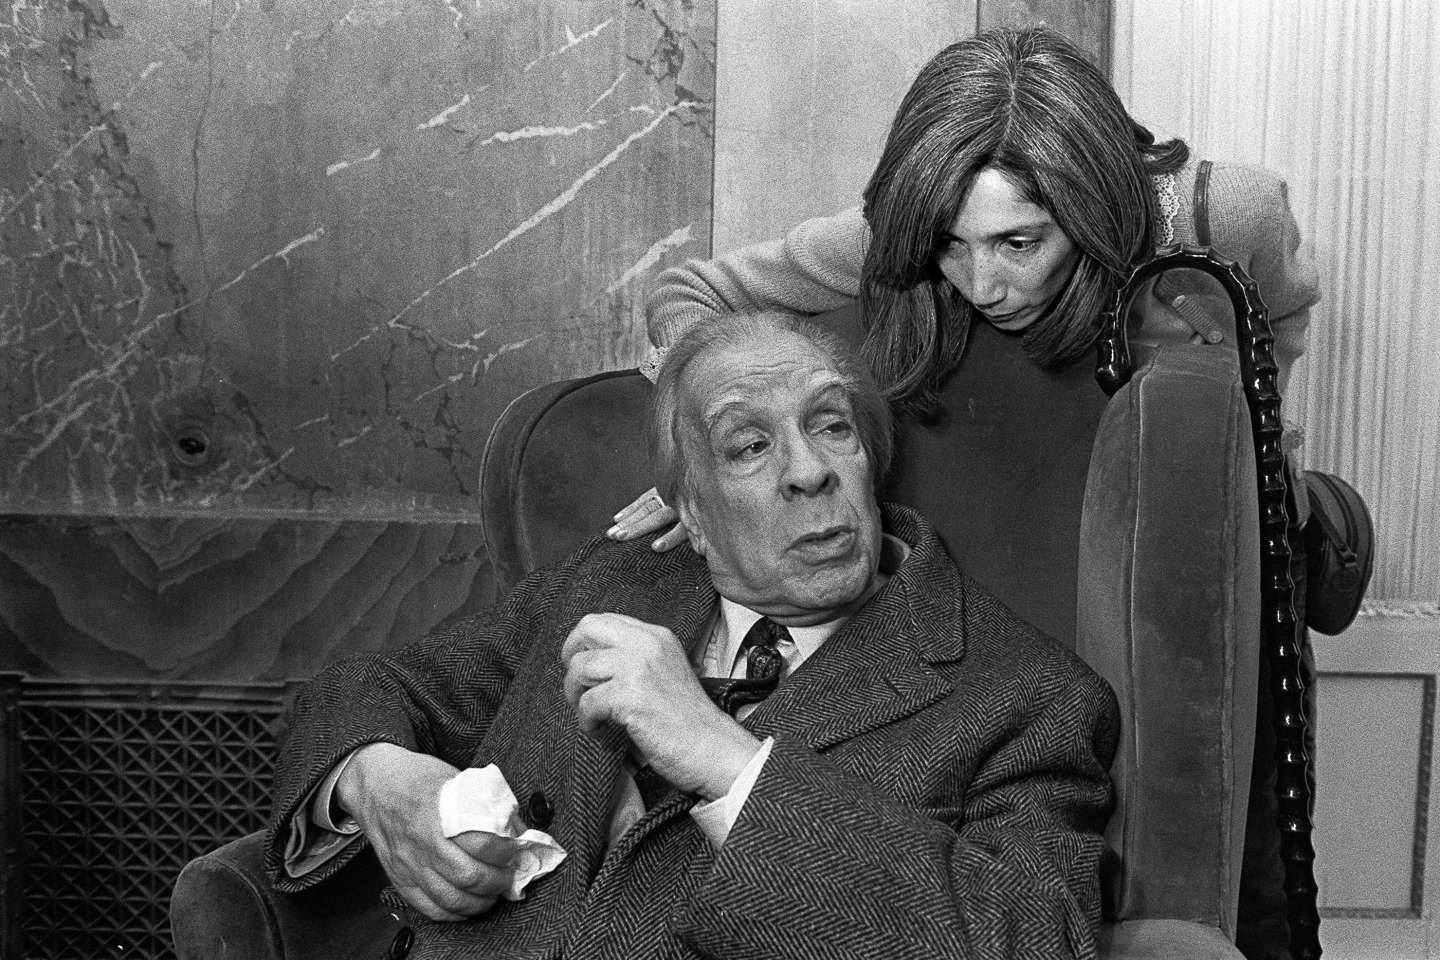 Jorge Luis Borges, confusion around a legacy